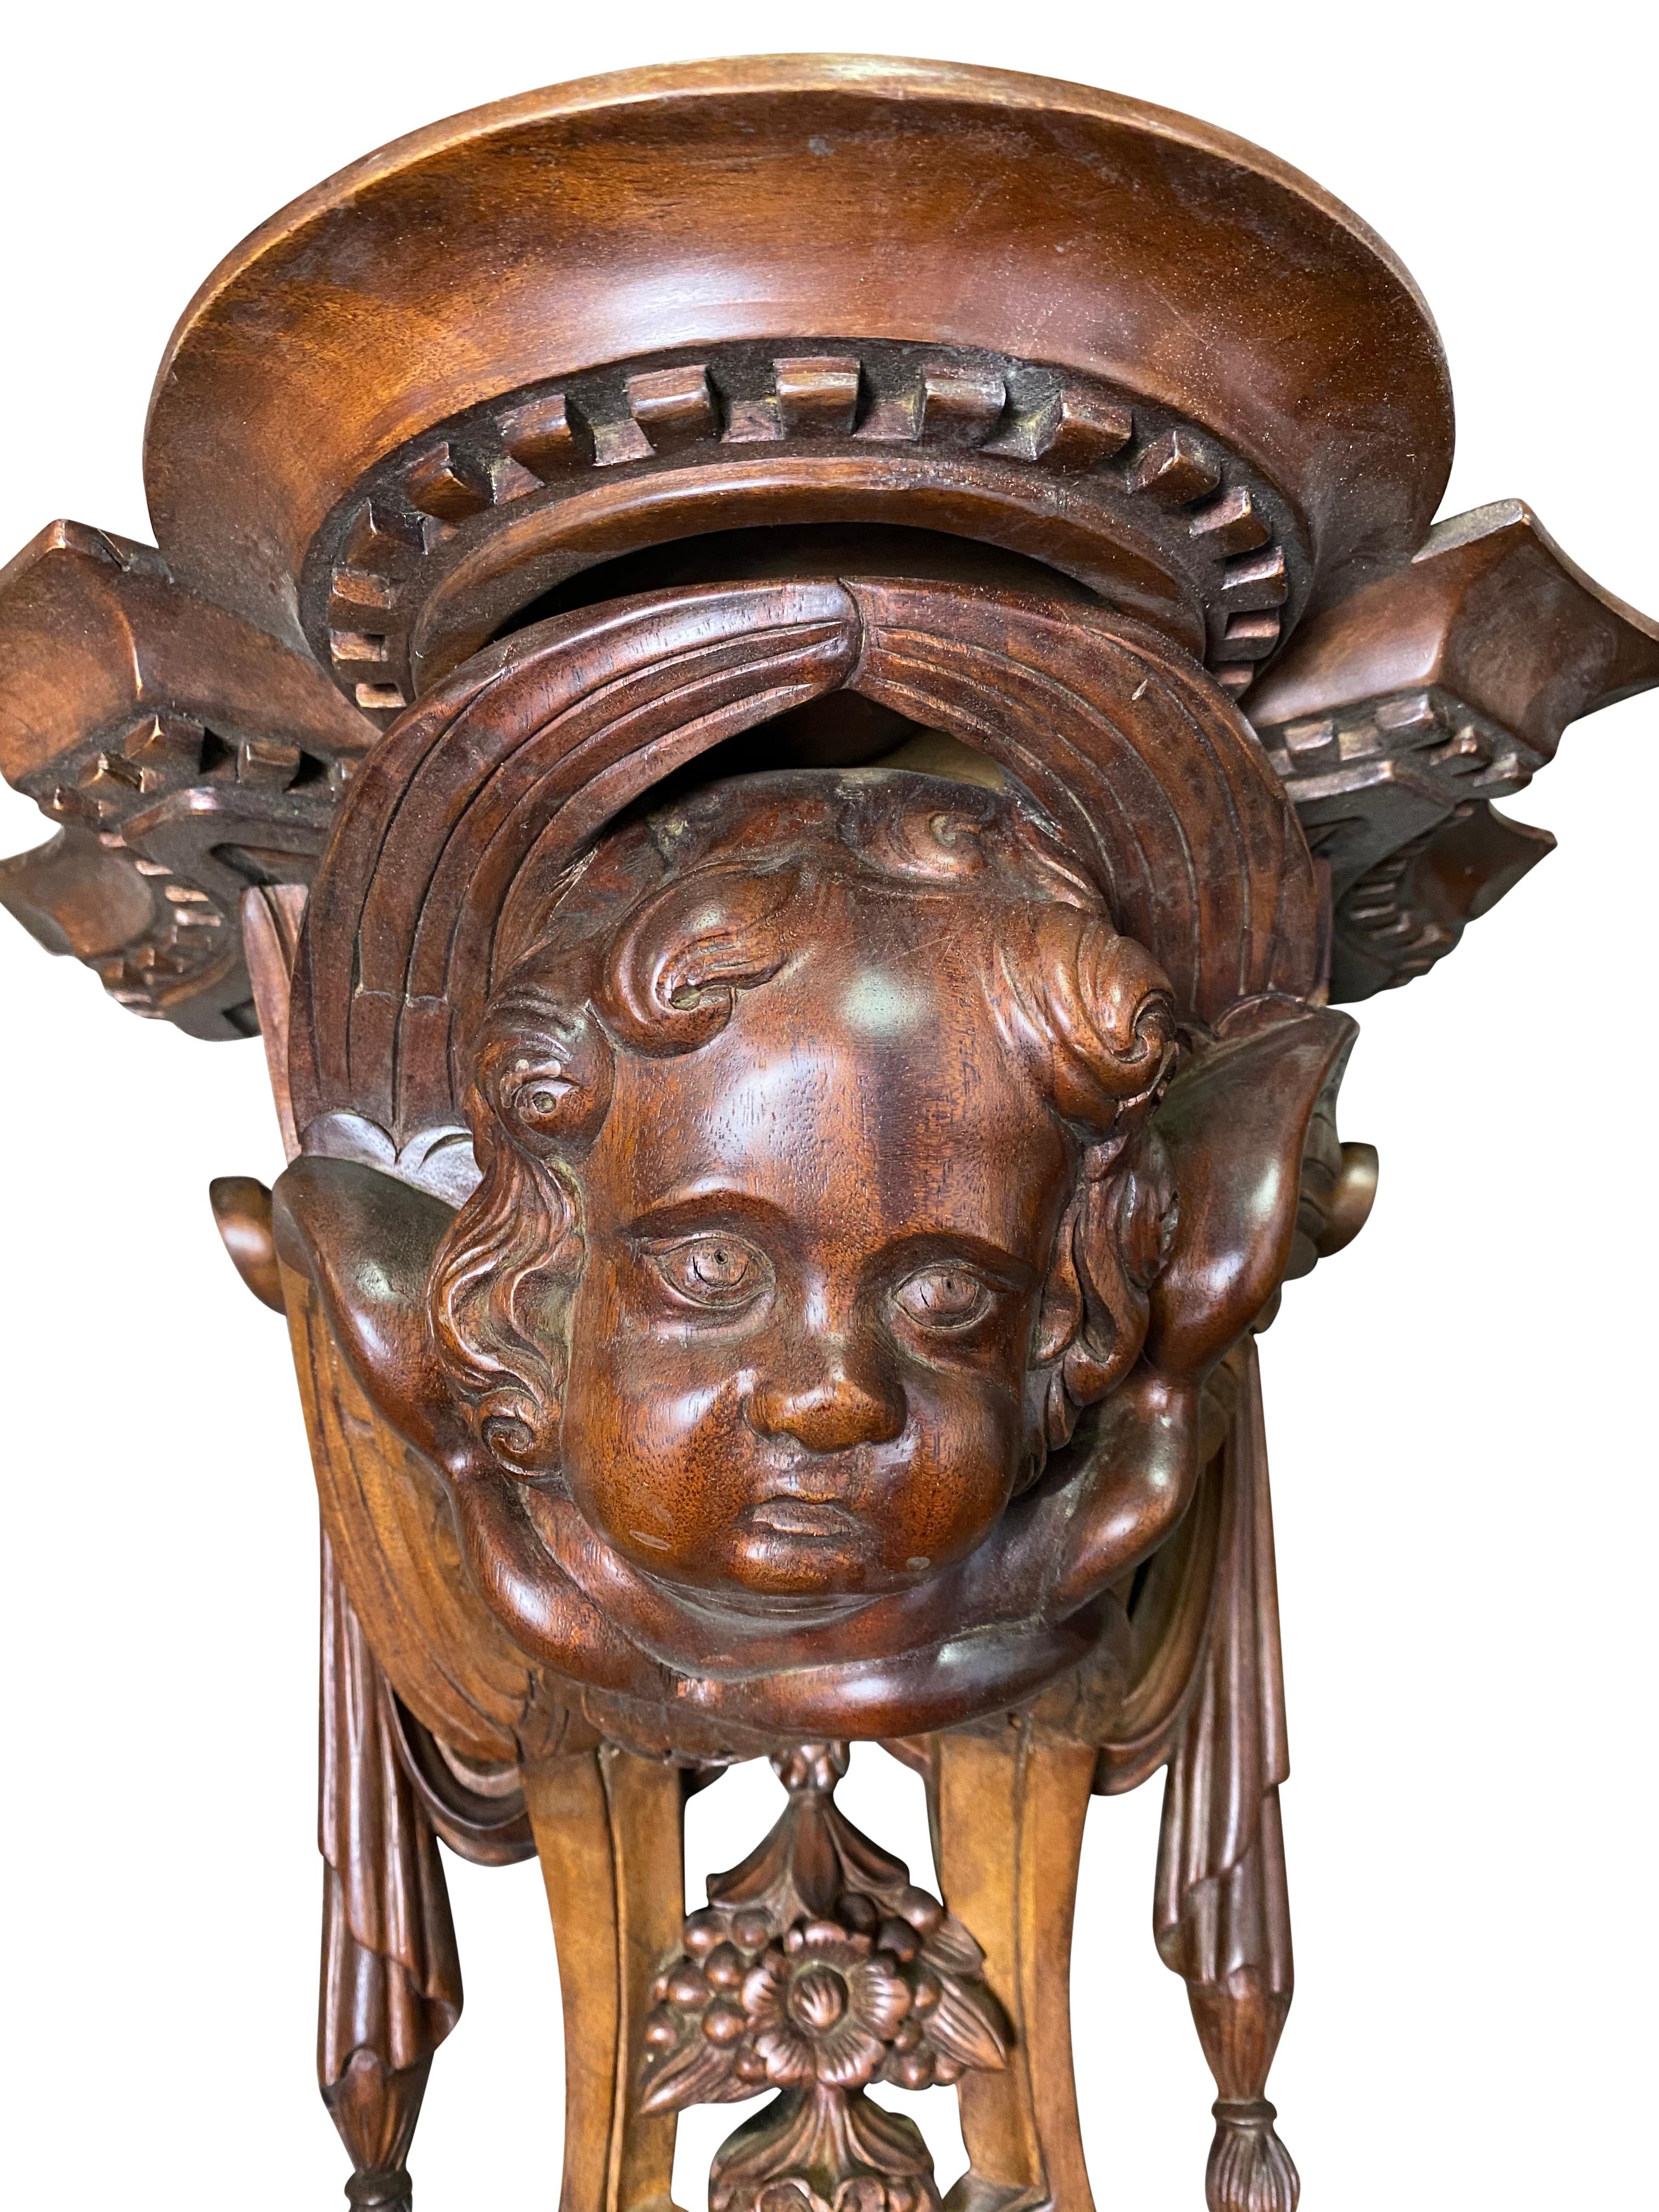 Romantic Wooden Carved Wall Sconces with Cherub Faces, 20th Century For Sale